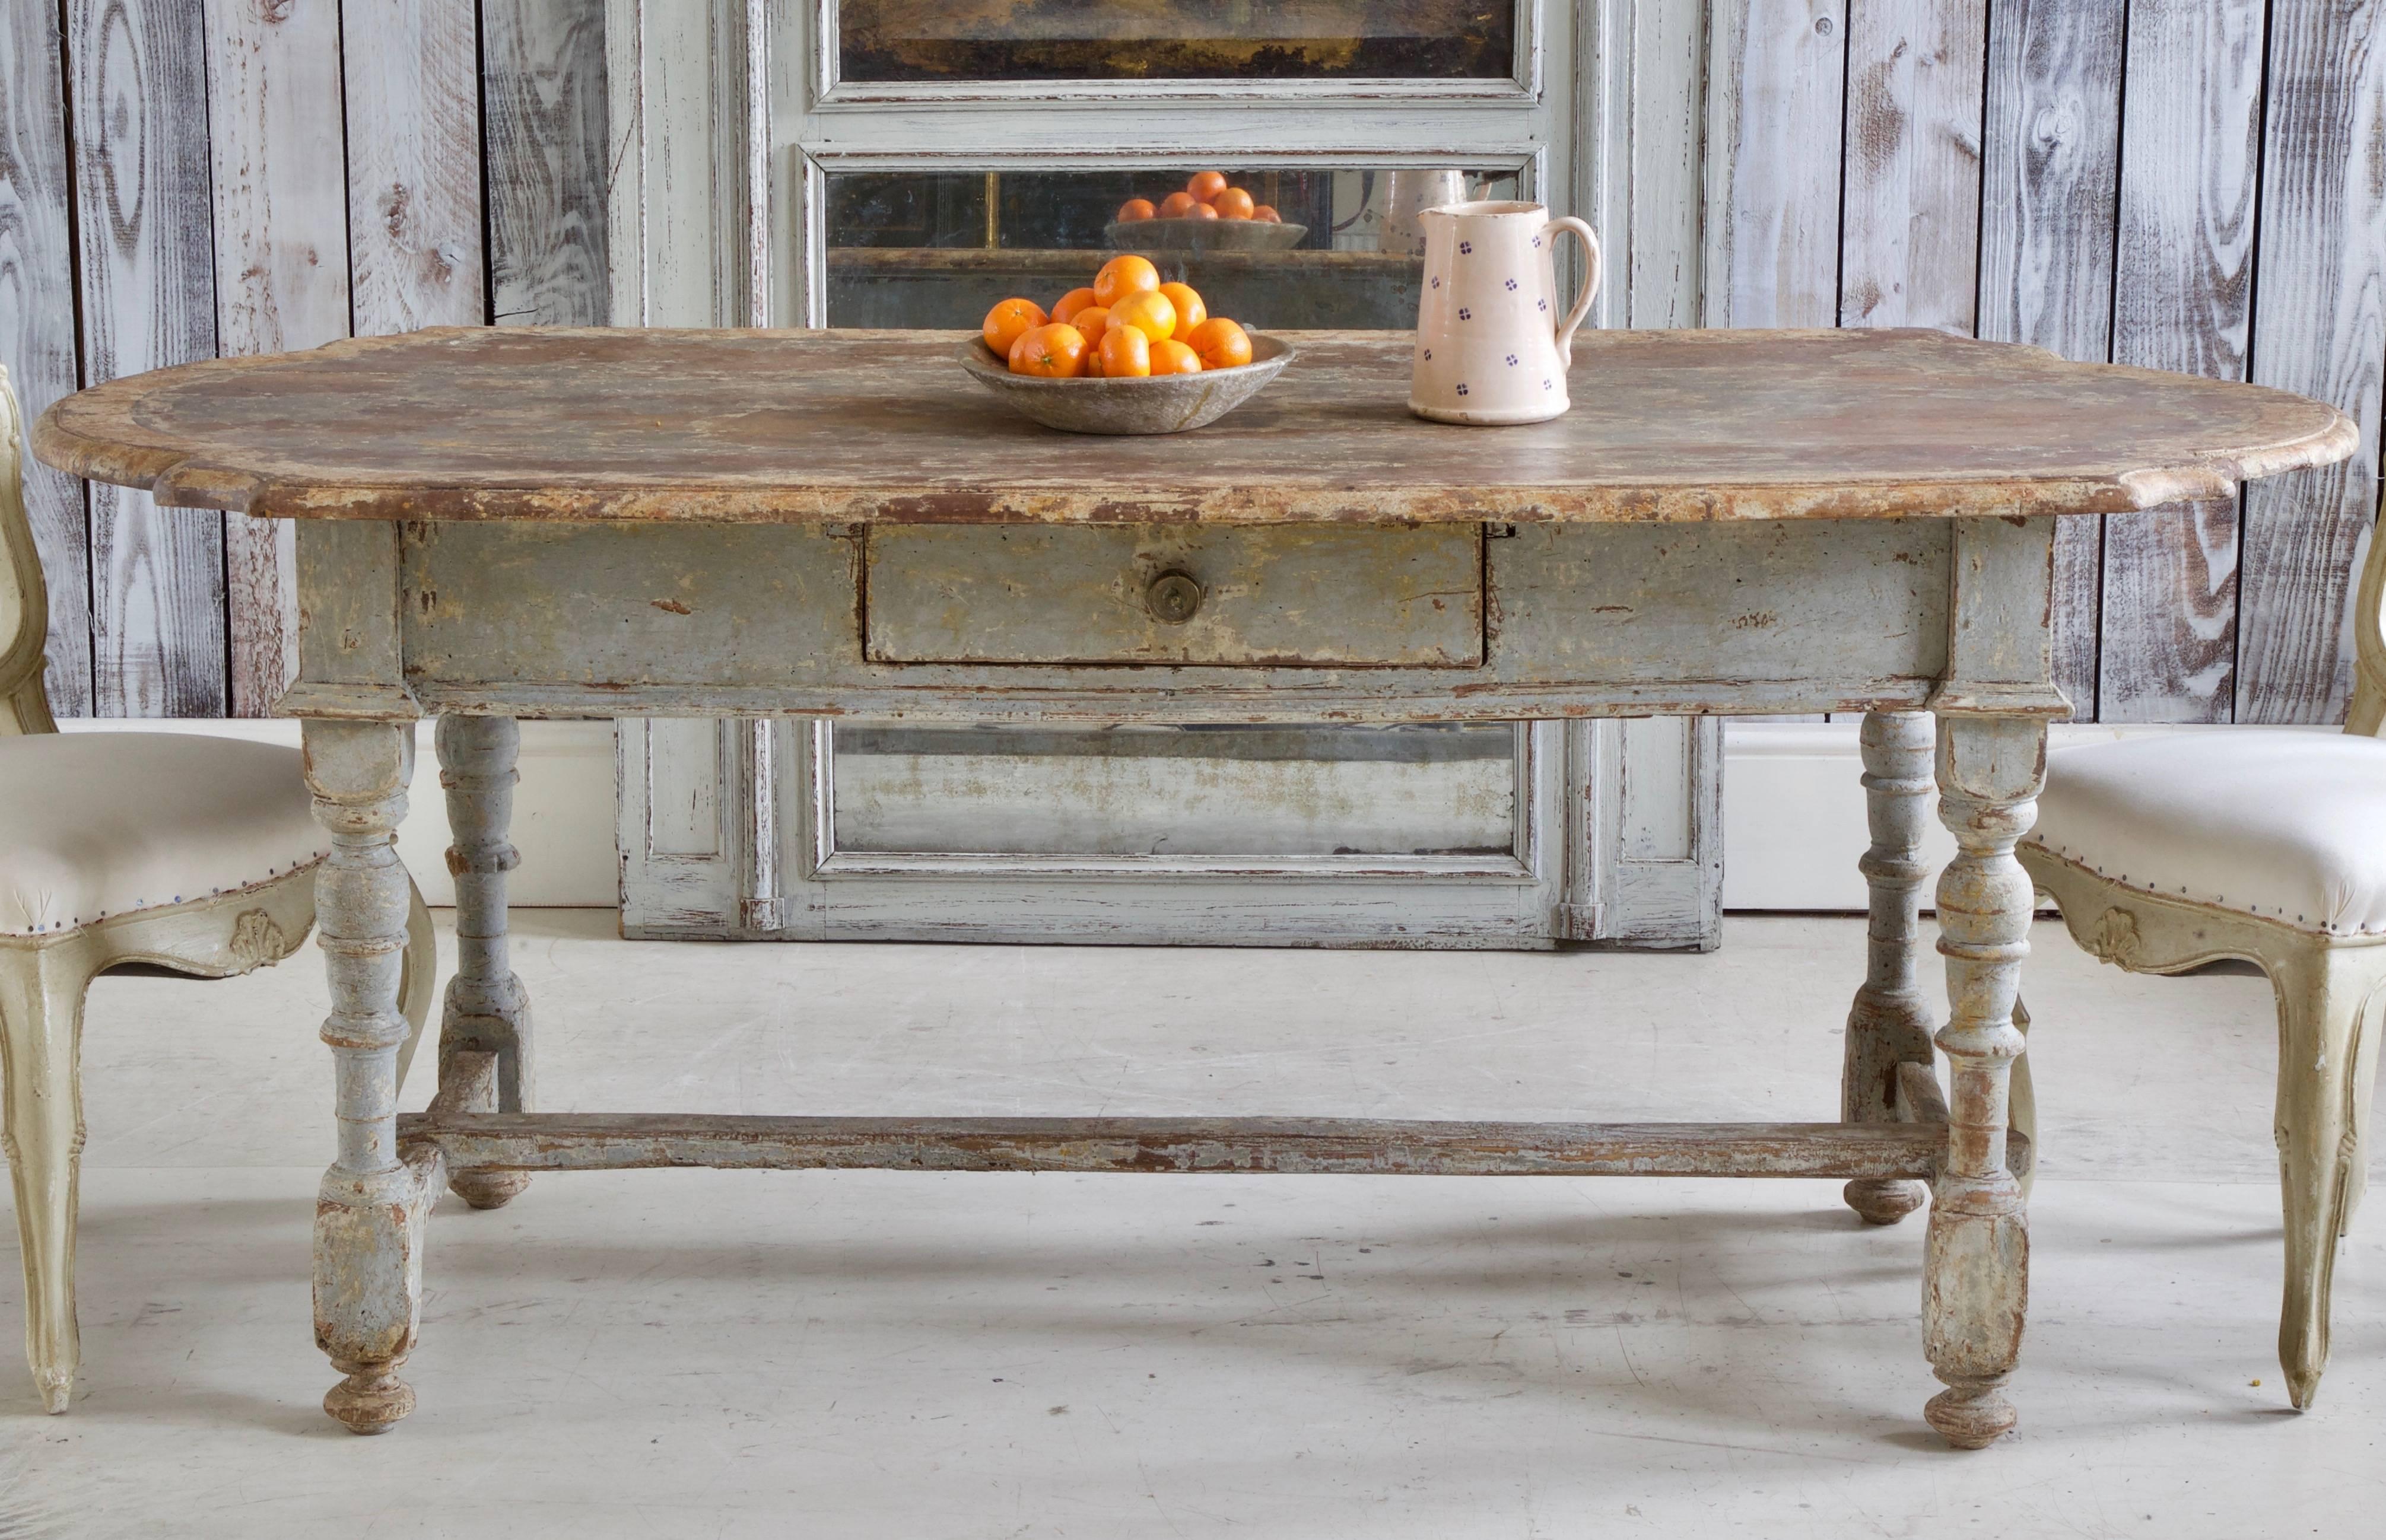 Hand-Painted 17th Century Rustic Farmhouse Table